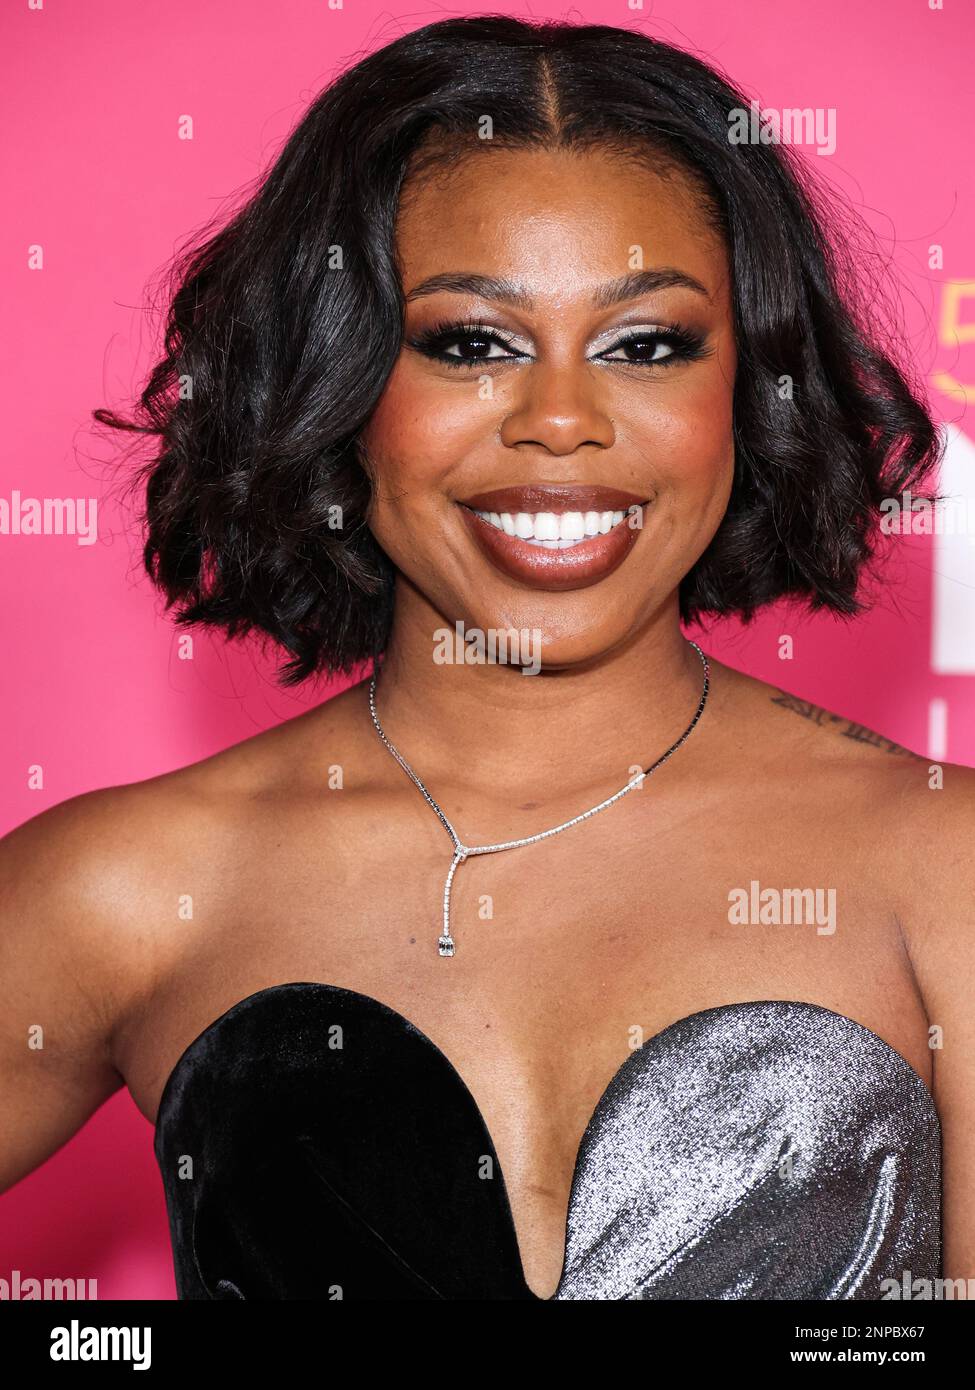 Pasadena, United States. 25th Feb, 2023. PASADENA, LOS ANGELES, CALIFORNIA, USA - FEBRUARY 25: Gail Bean poses in the press room at the 54th Annual NAACP Image Awards held at the Pasadena Civic Auditorium on February 25, 2023 in Pasadena, Los Angeles, California, United States. (Photo by Xavier Collin/Image Press Agency) Credit: Image Press Agency/Alamy Live News Stock Photo